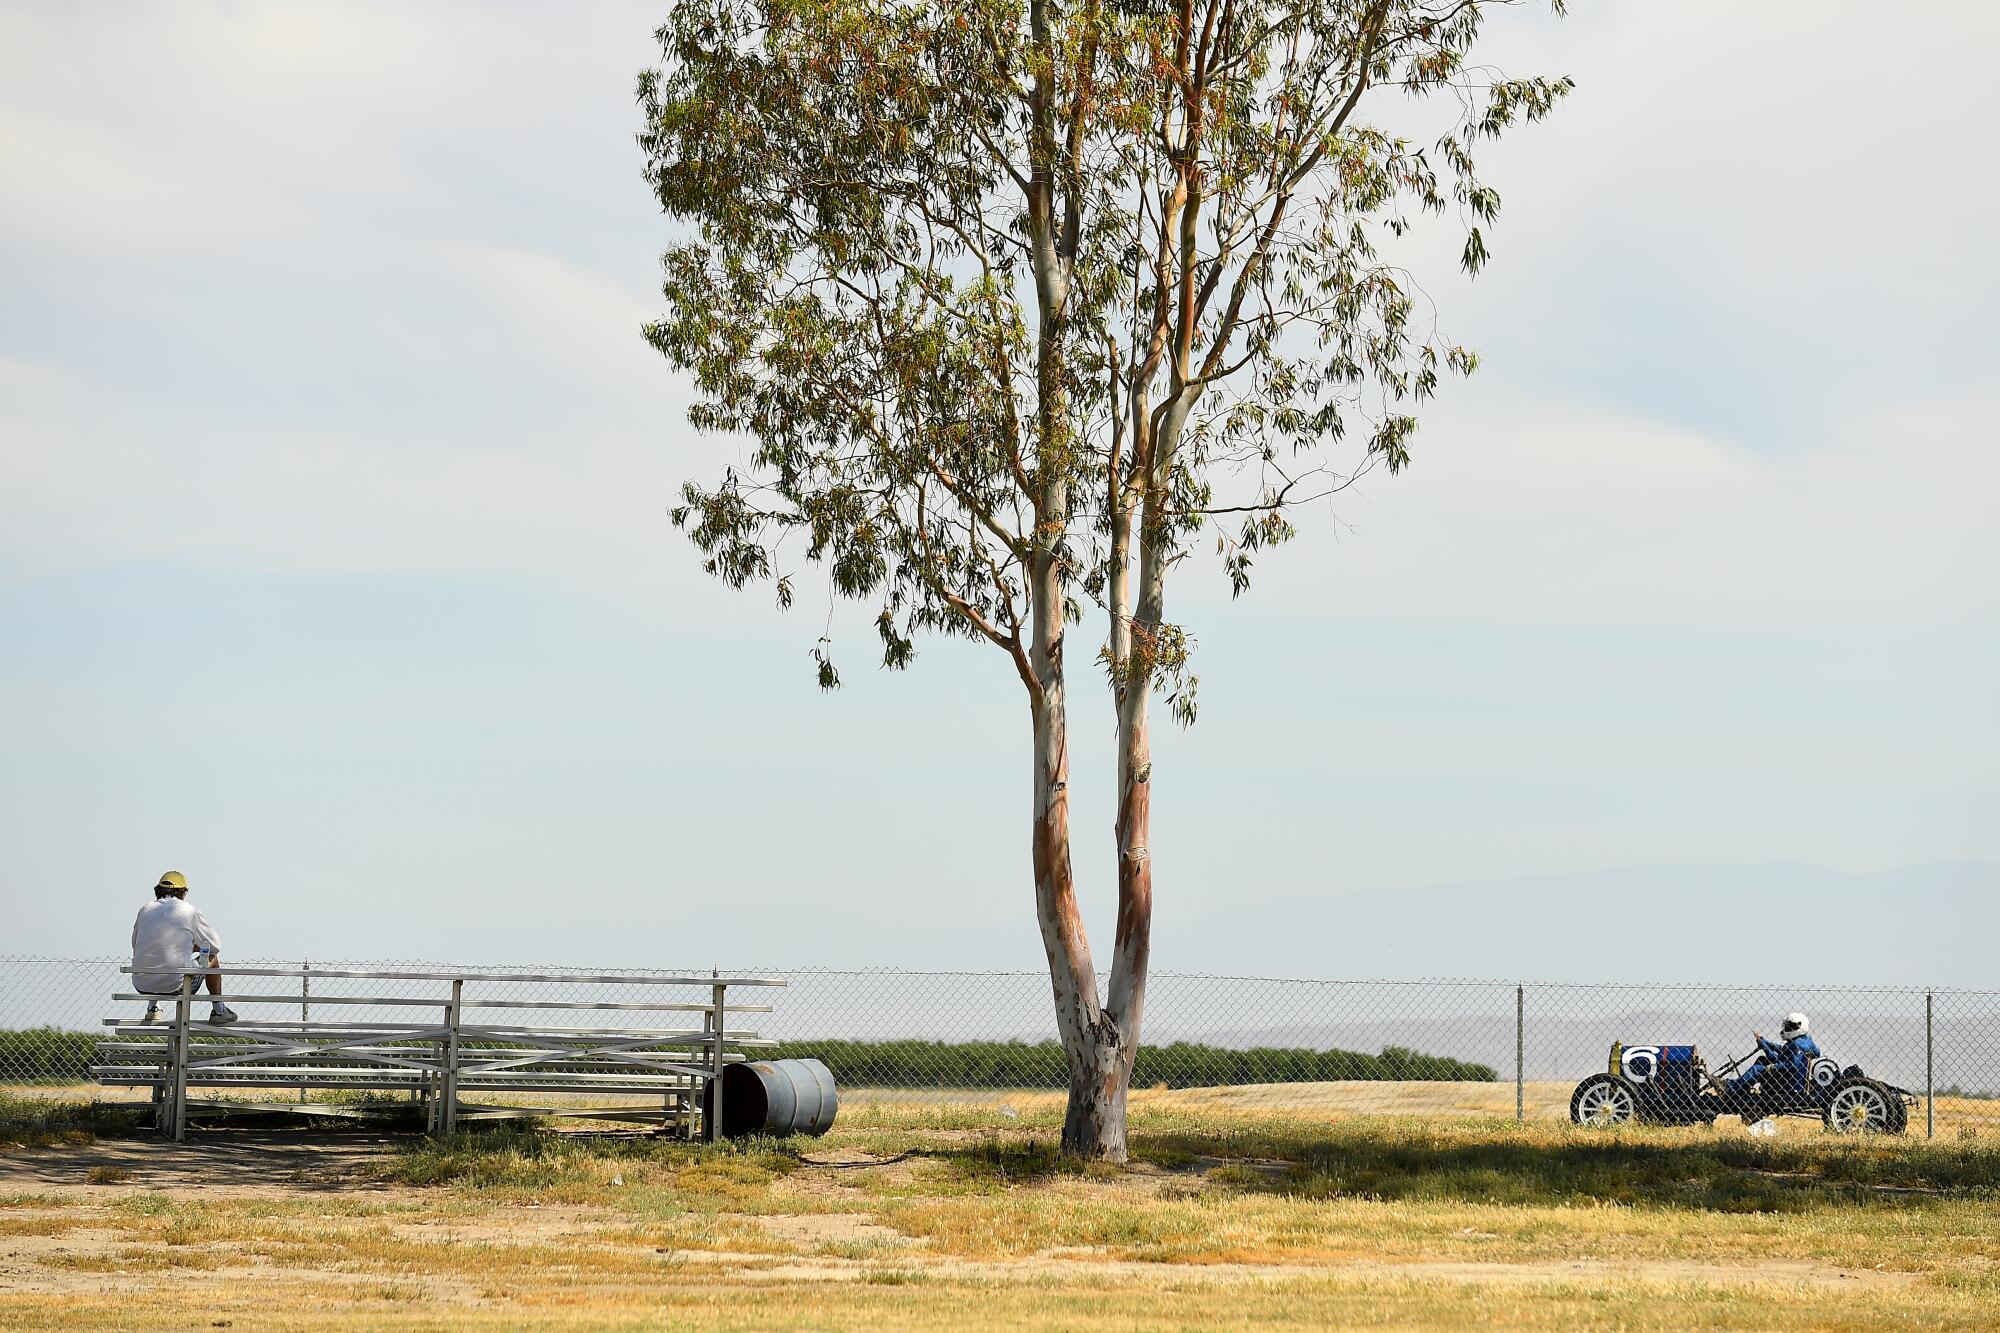 A lone spectator watches a vintage car drive by during a race at Buttonwillow Raceway in Buttonwillow, Calif., on Saturday. The Vintage Auto Racing Assn. held the races over the weekend as California slowly reopens after coronavirus shutdowns.